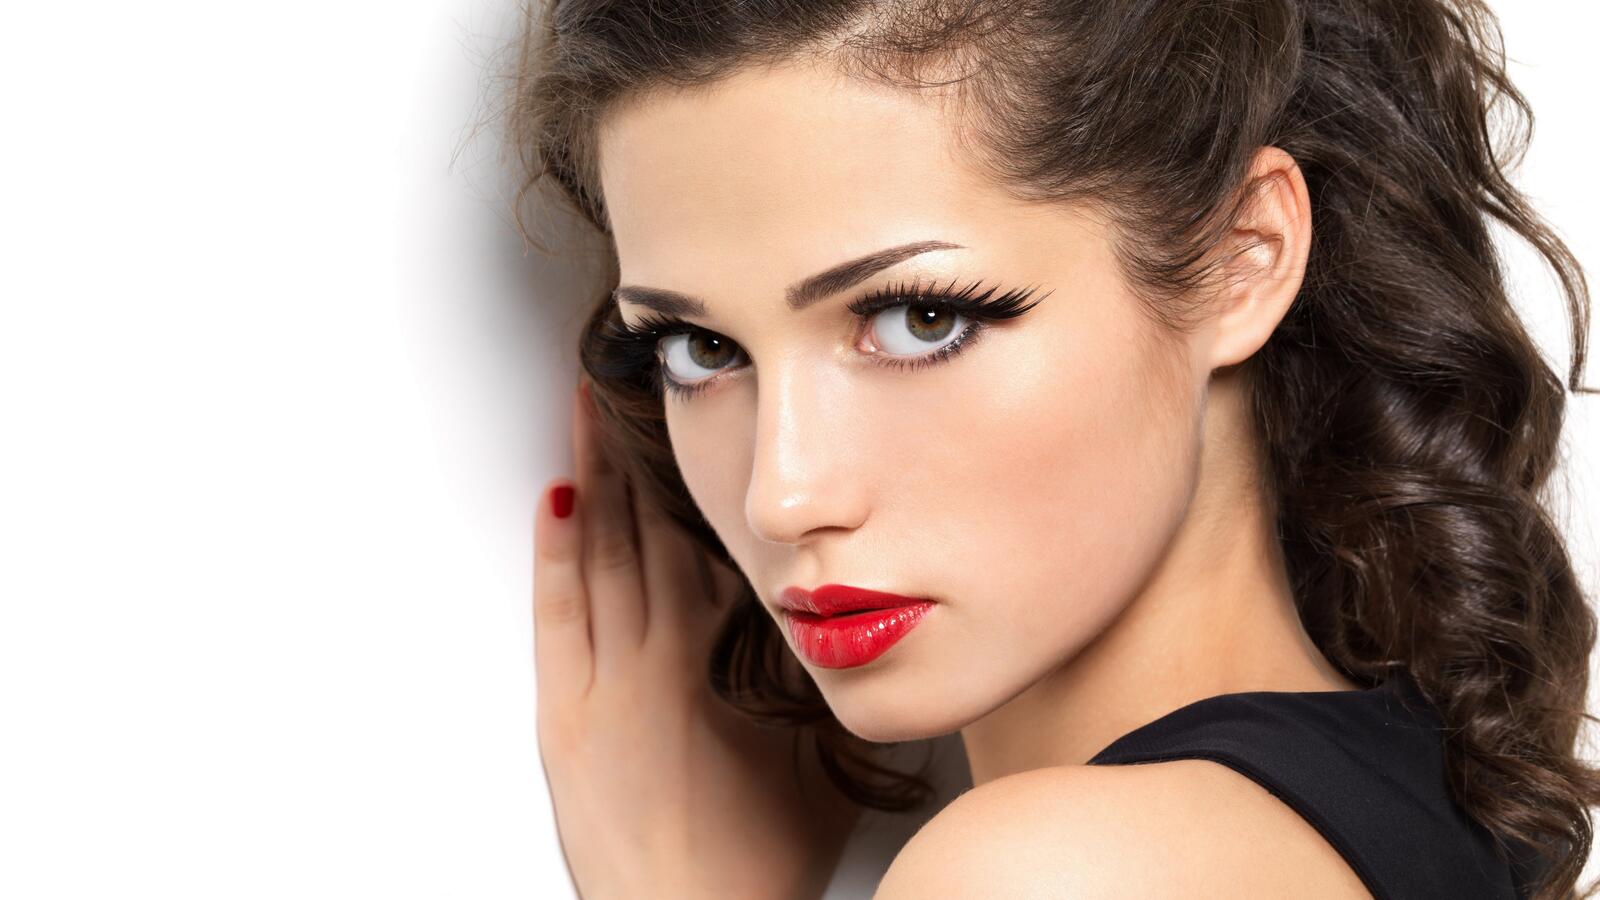 Free photo Portrait of a dark-haired girl with red lipstick on her lips